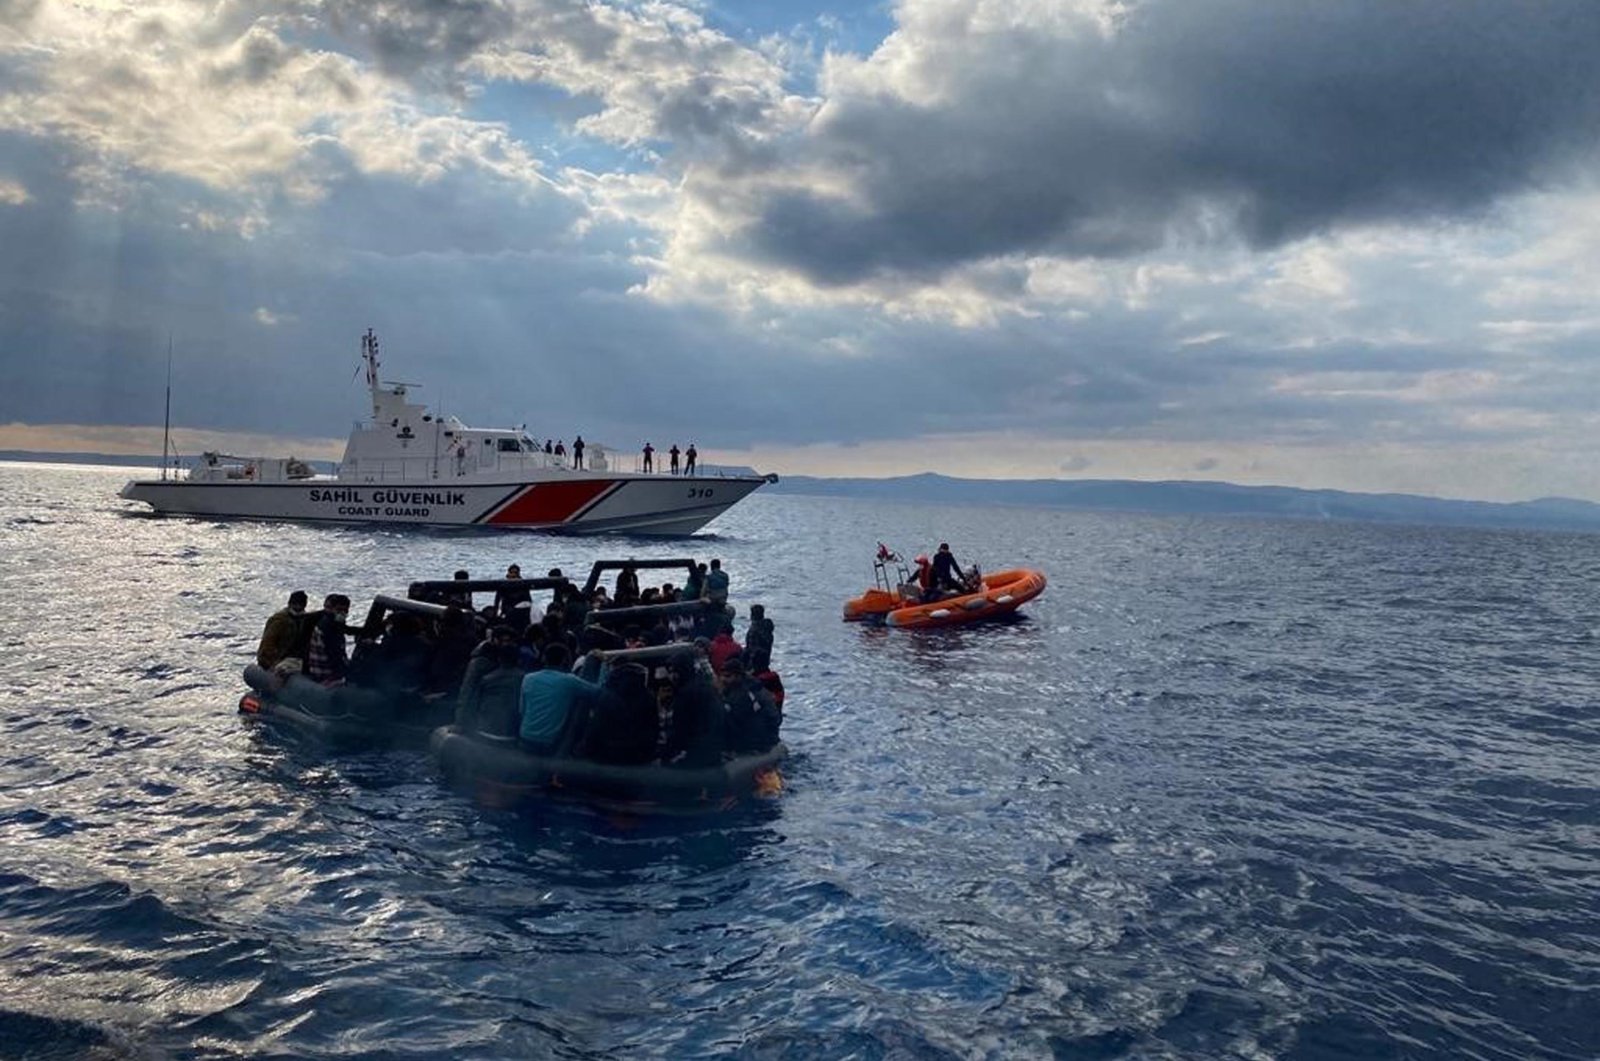 Turkish units try to rescue migrants in the Aegean Sea, Turkey, Feb. 5, 2022. (DHA Photo)